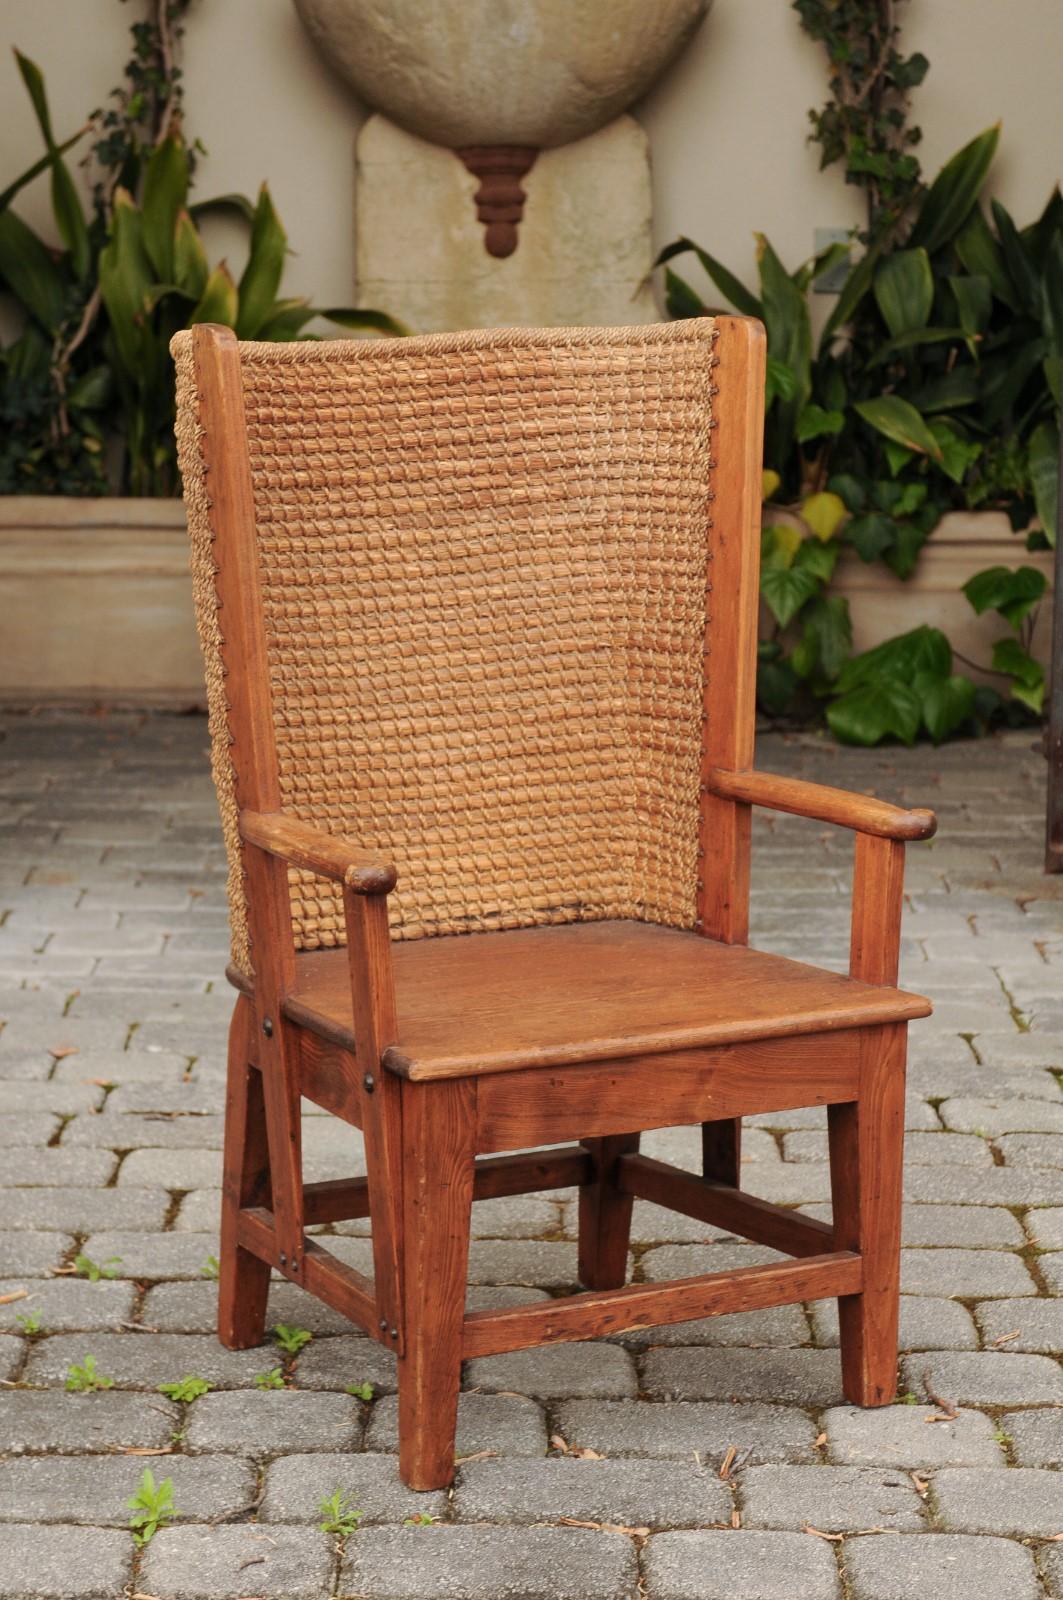 20th Century Small Scottish Orkney Wingback Chair with Handwoven Straw Back, circa 1900 For Sale